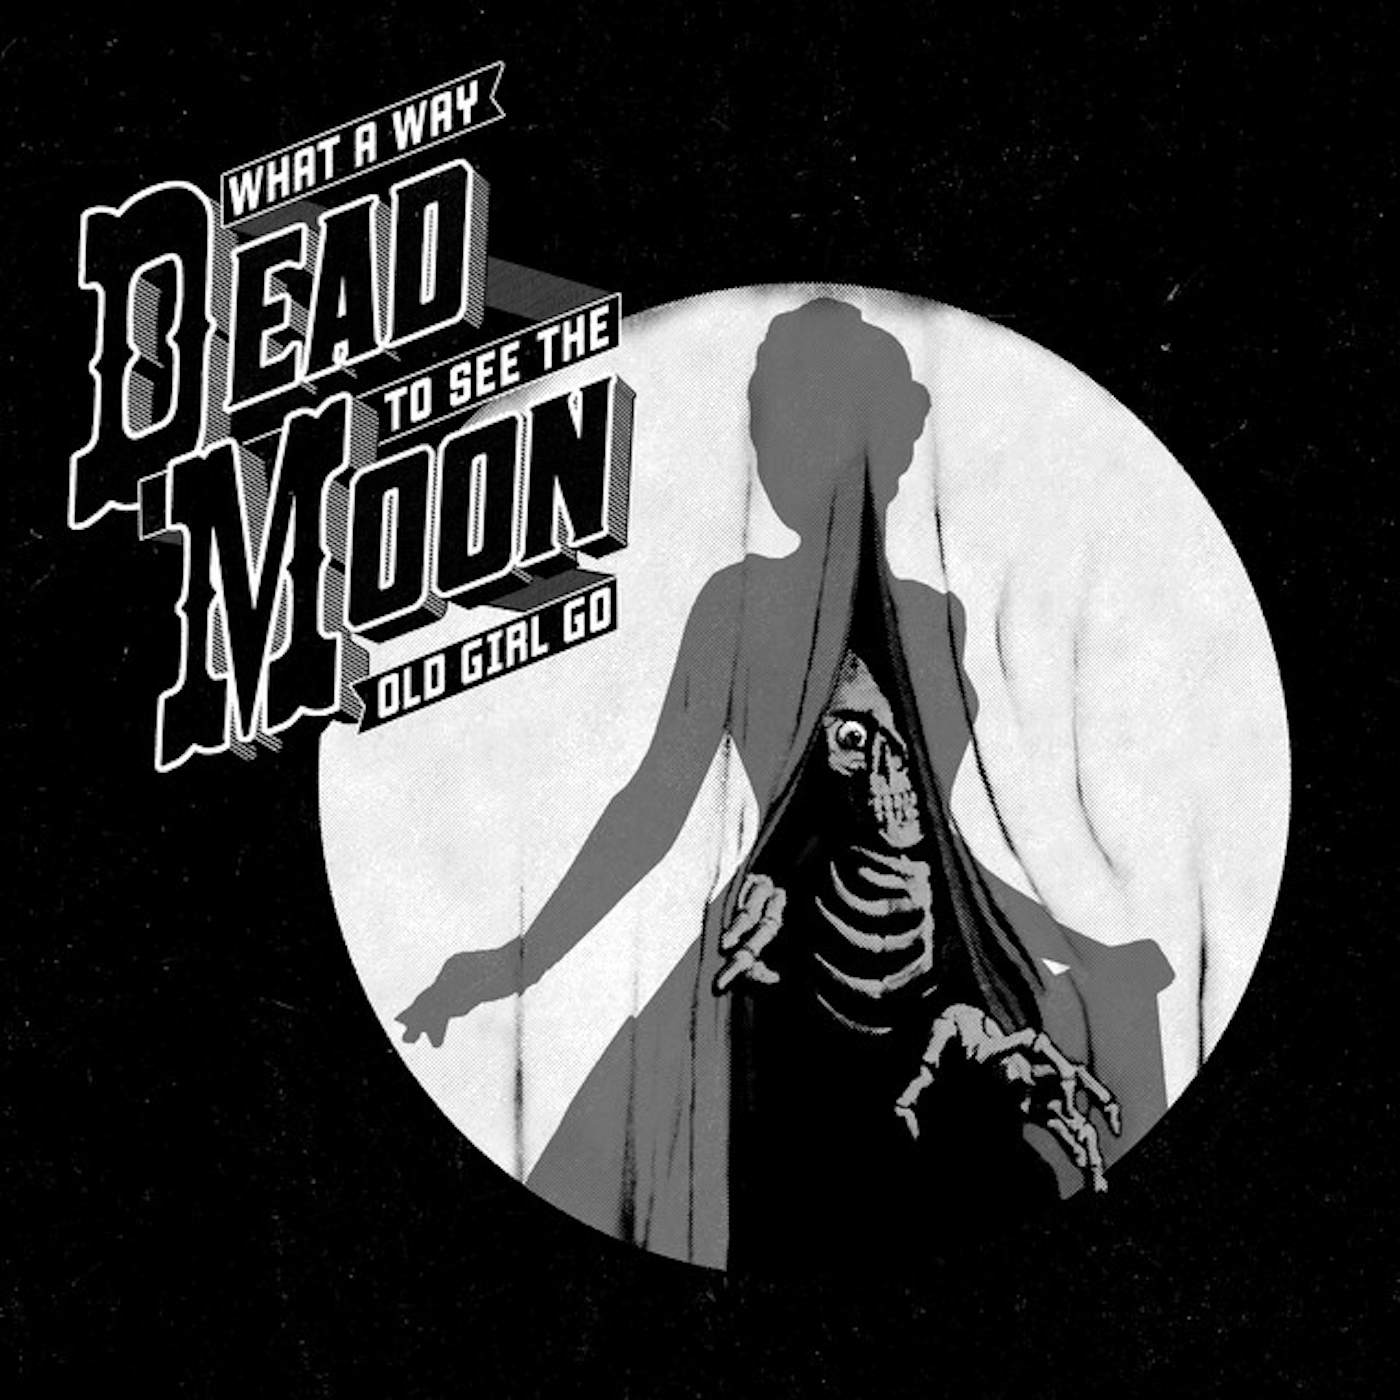 Dead Moon What a Way to See the Old Girl Go Vinyl Record